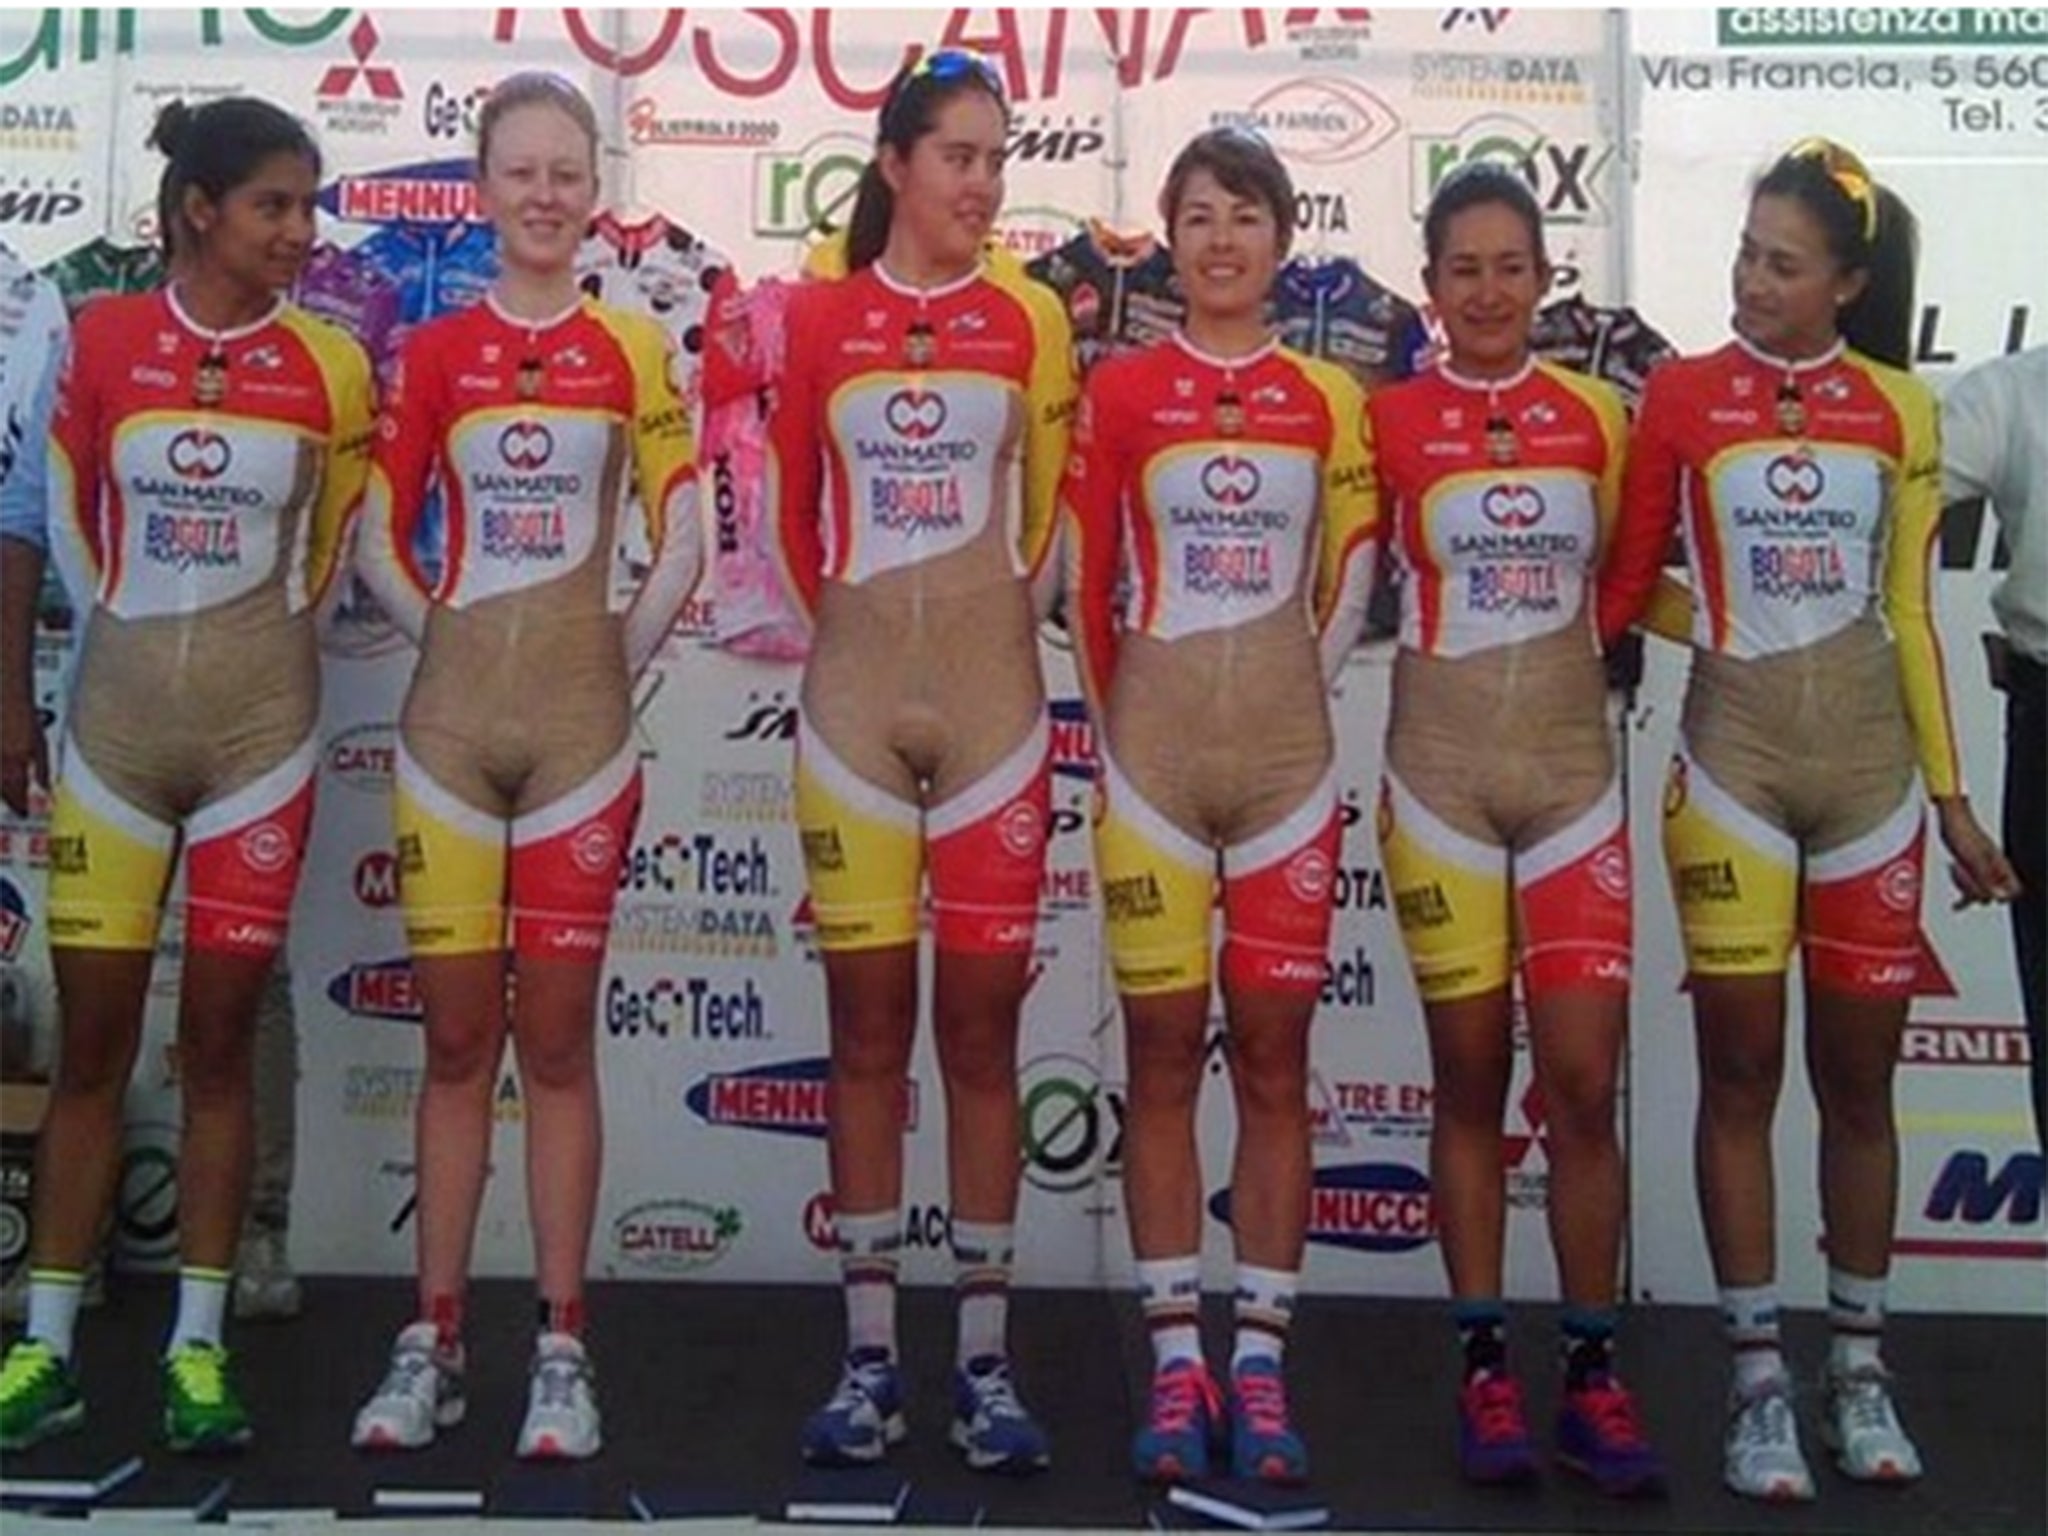 A Colombian women's cycling team sport a controversial kit